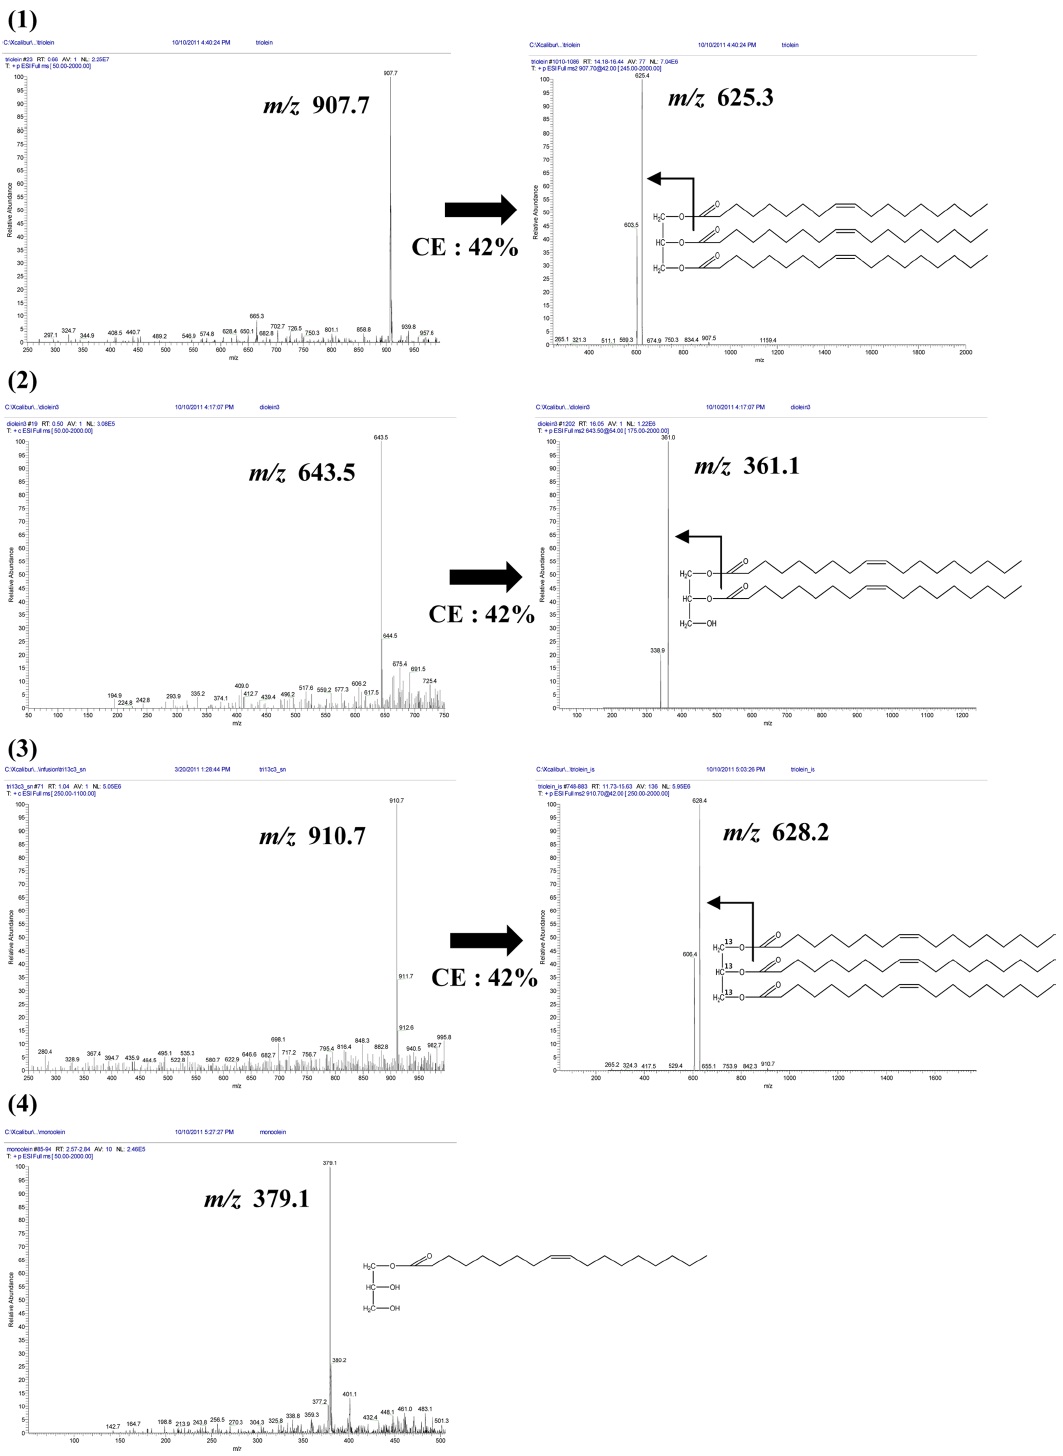 The LC-ESI/MS mass spectrums of full scan mode and selected-reaction monitoring mode of the oleins (1) triolein, (2) diolein, (3) 13C3-triolein as an internal standard and (4) monoolein.